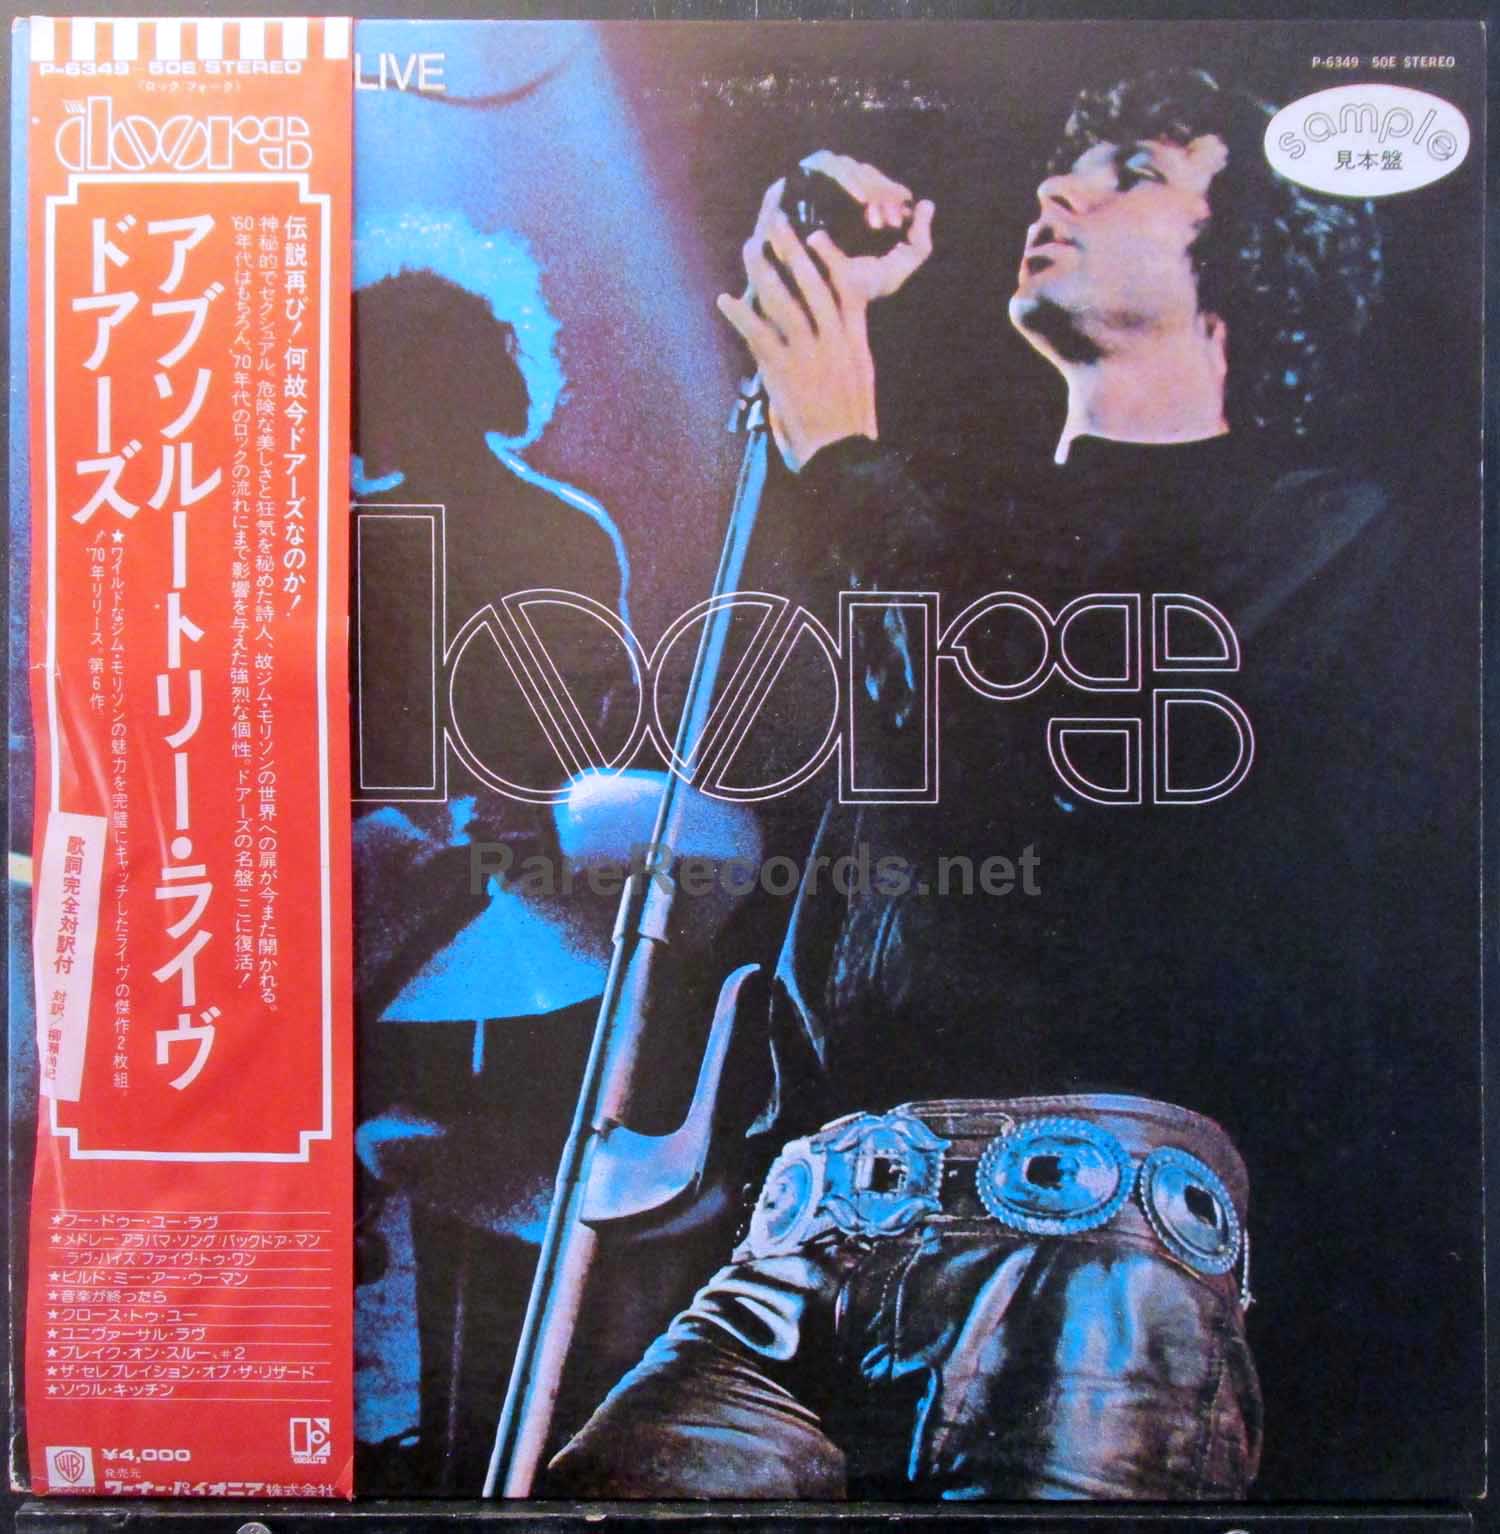 Doors - Absolutely Live! Japan promo lp